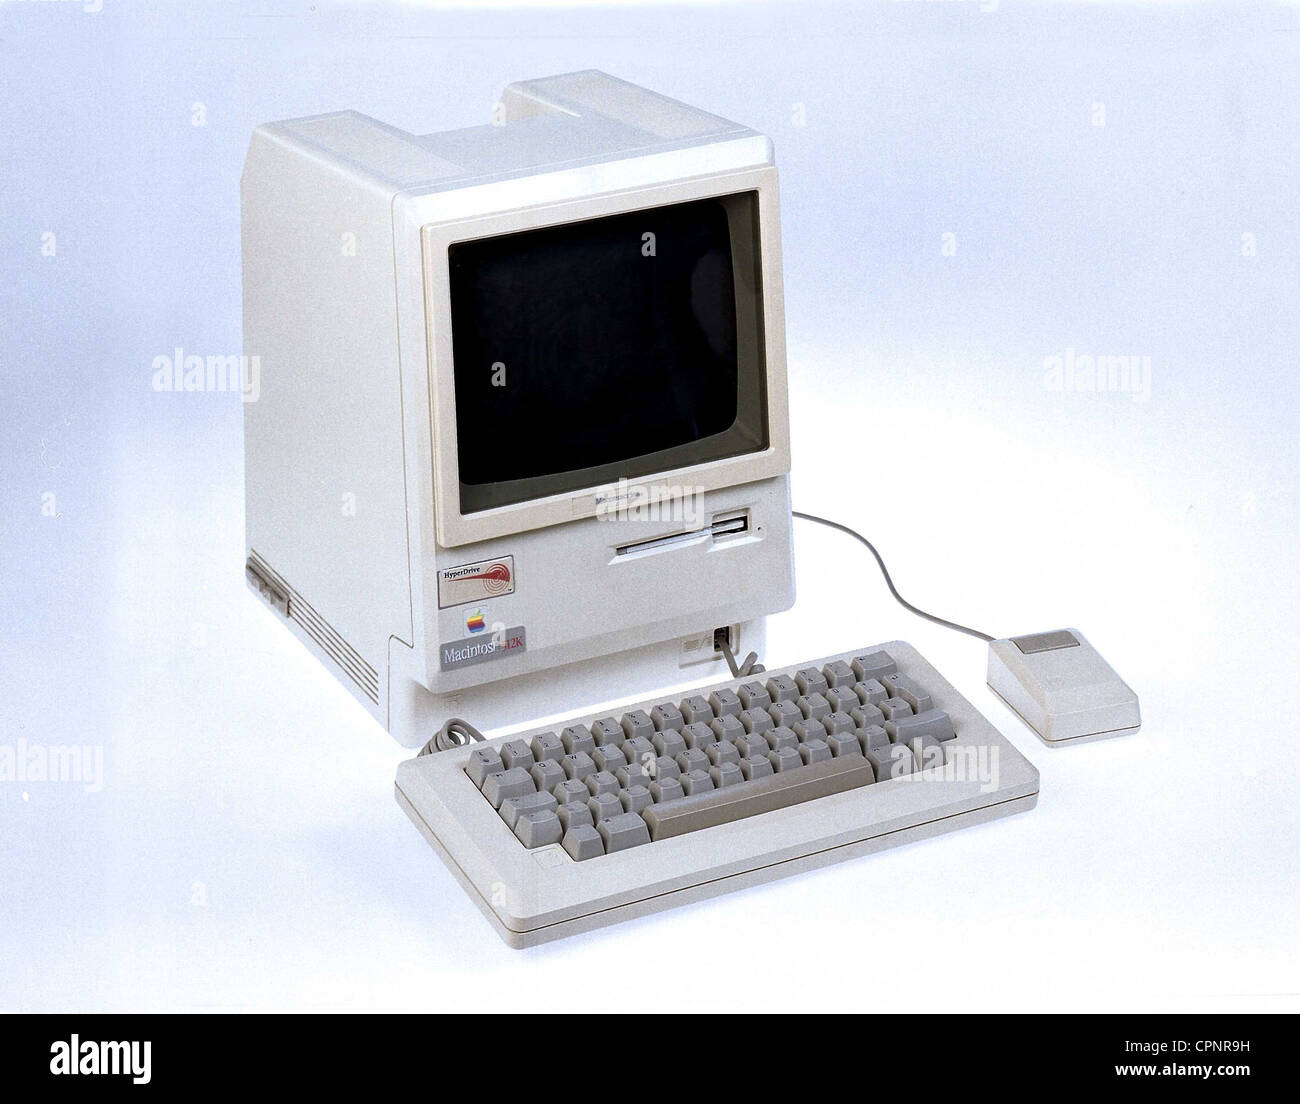 computing / electronics,computer,Apple Macintosh 512k,with integrated 9 inch bw-monitor and 3.5 inch floppy disk drive,USA,1984,keyboard,keyboards,computer mouse,clicker,mice,mouses,512 kilobyte random access memory,processor Motorola 68000,8 megahertz,original price 1984: 3.195 dollar,design,classic,nickname: Apple Mac,cubes,Mac cube,personal computer,history of computer,computer engineering,invention,inventions,80s,W. M. Weber Collection,EDP,IT,still,studio shot,hardware,consumer electronics,home computer,compact unit,compa,Additional-Rights-Clearences-Not Available Stock Photo